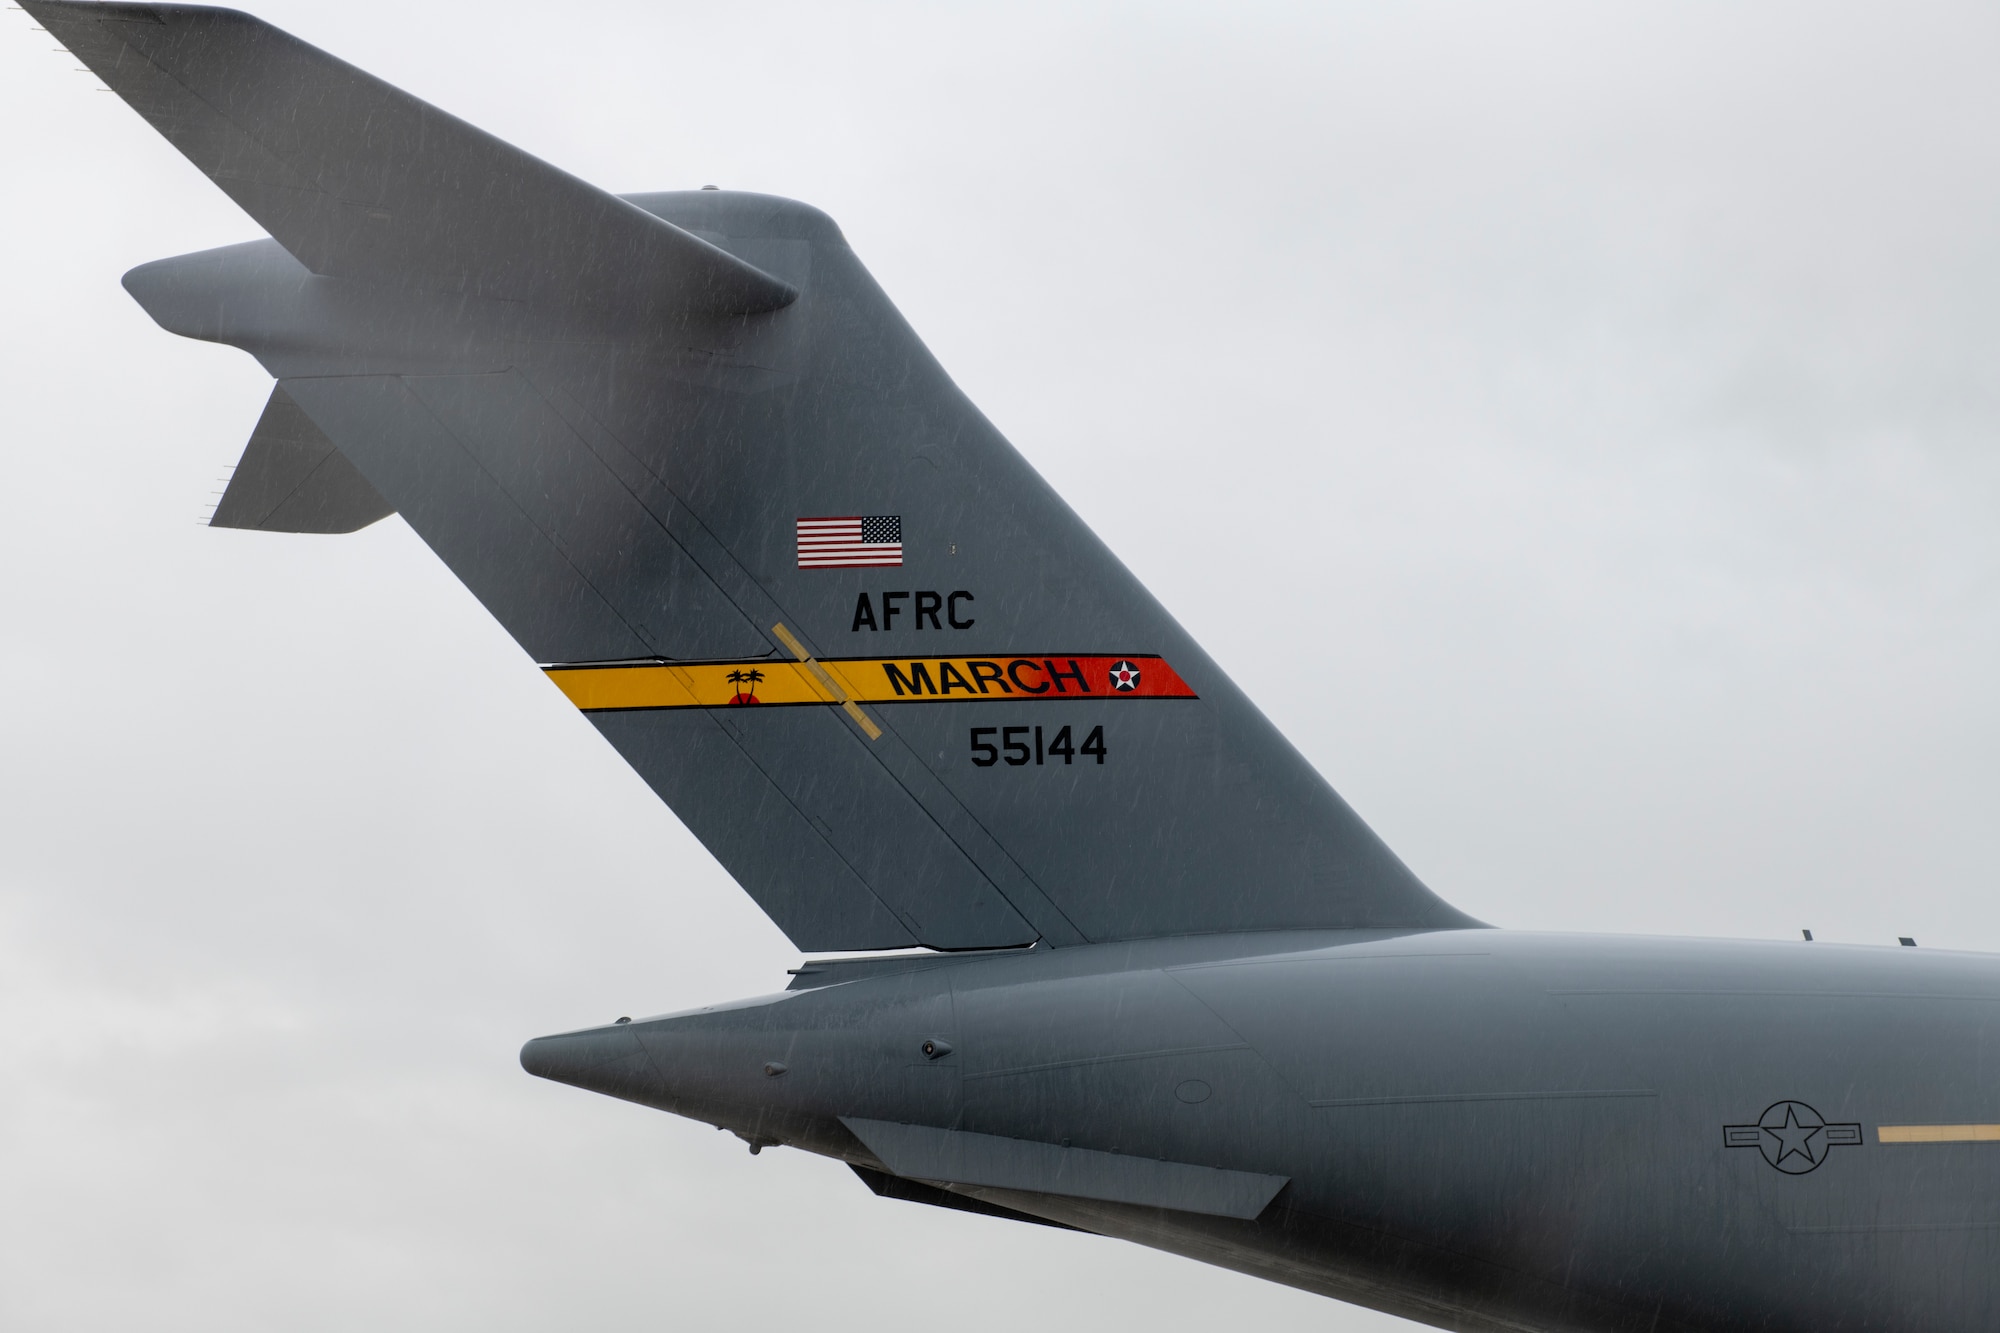 The tail of a C-17.